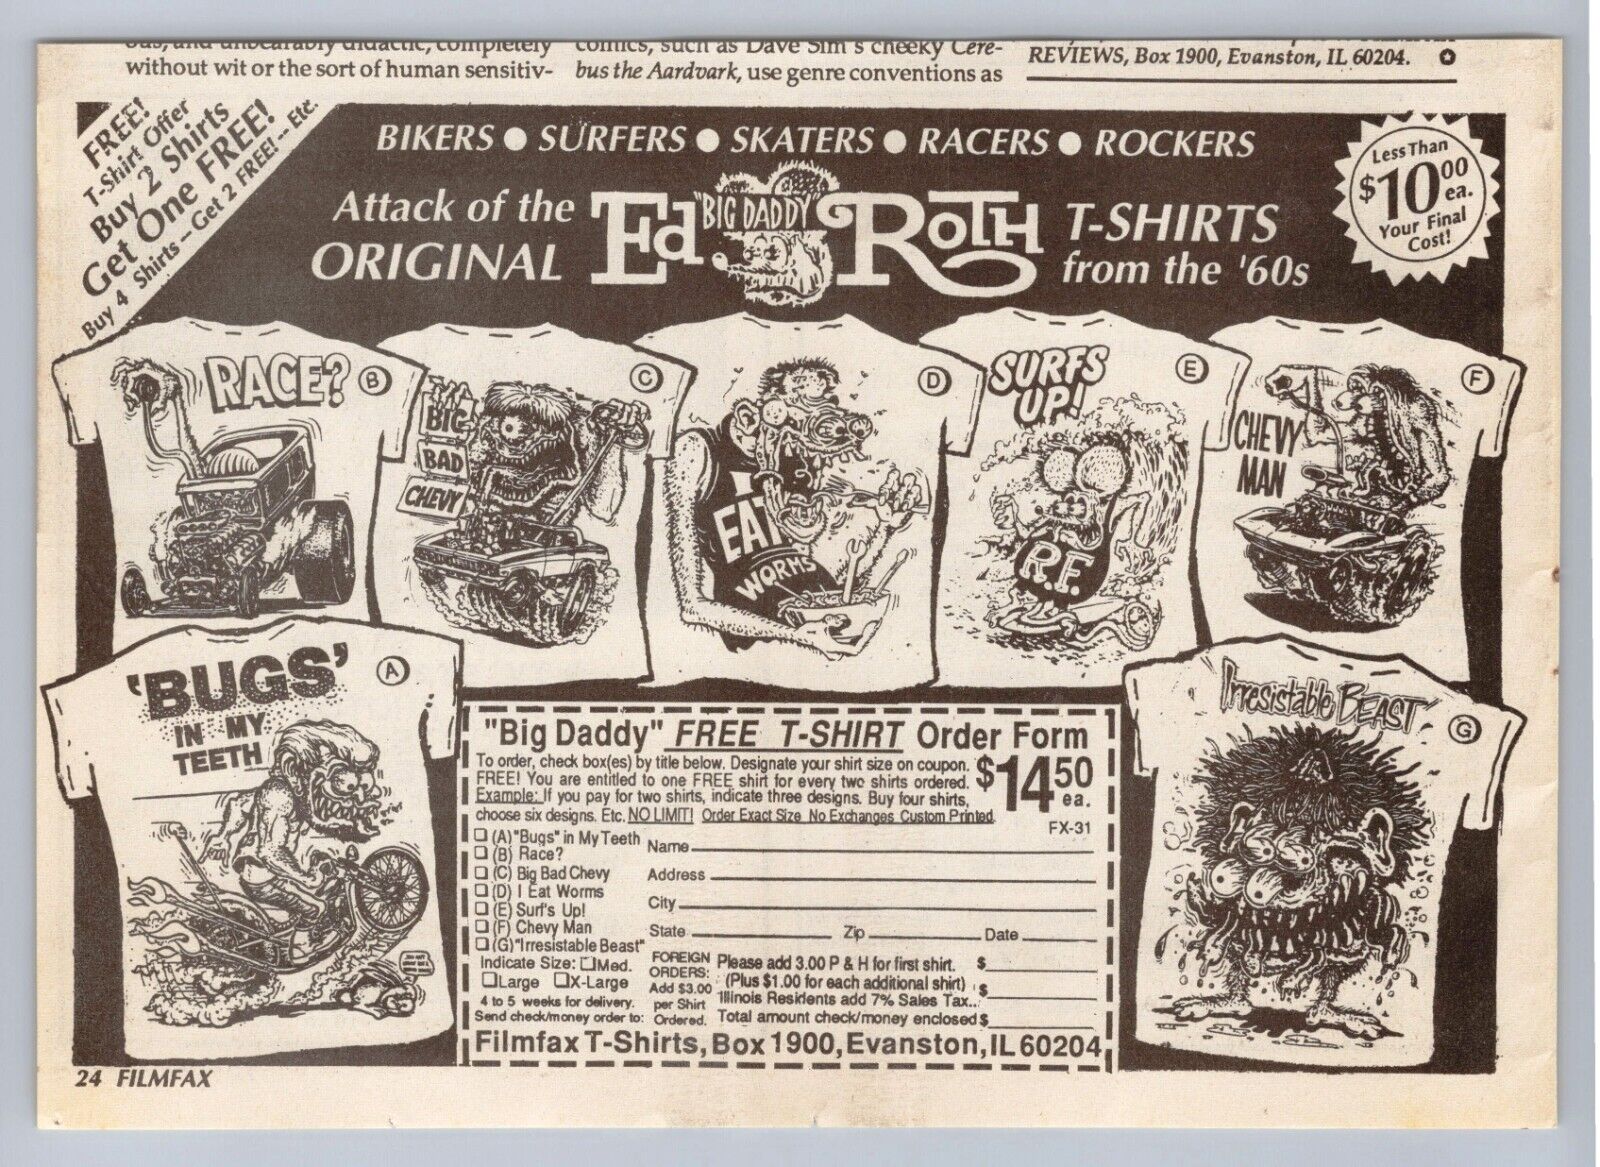 1992 Ed Big Daddy Roth T-Shirts From The 60's VINTAGE PRINT AD FFX92